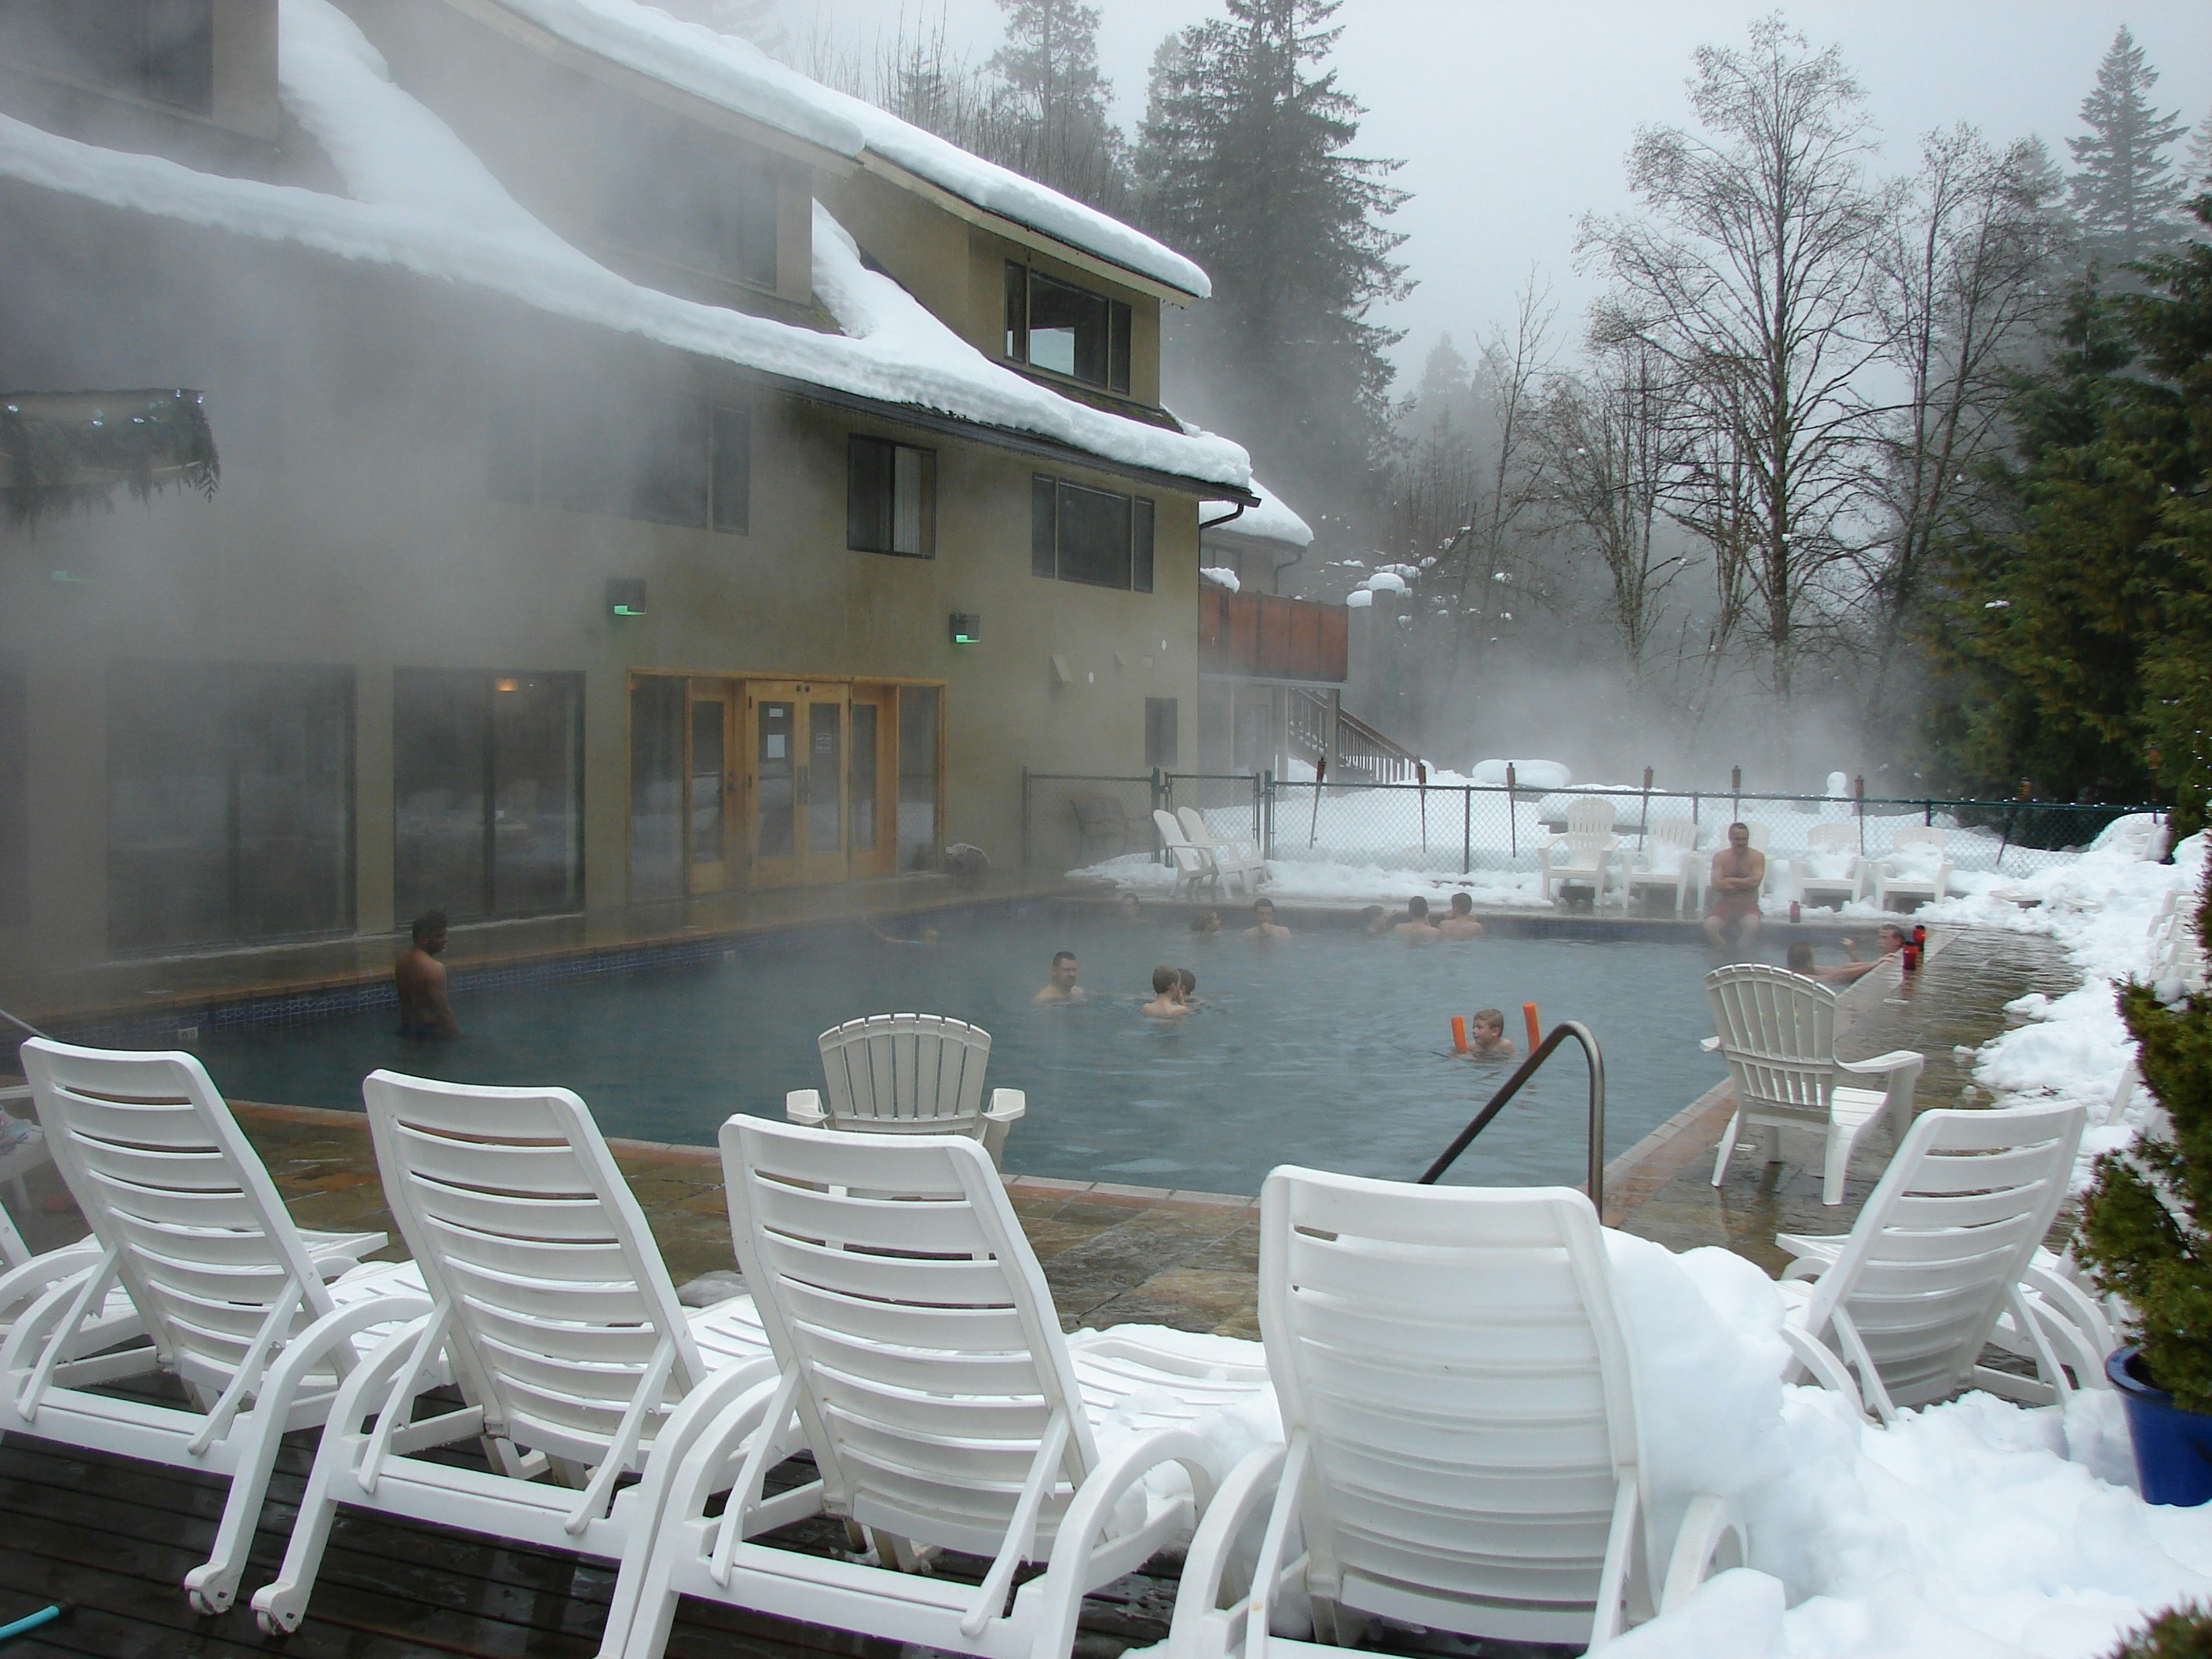 Steam rises against a grey sky and the snow-covered roof of Belknap Hot Springs Resort as bathers enjoy the blue waters of the pool, surrounded by plastic deck chairs as white as the snow.